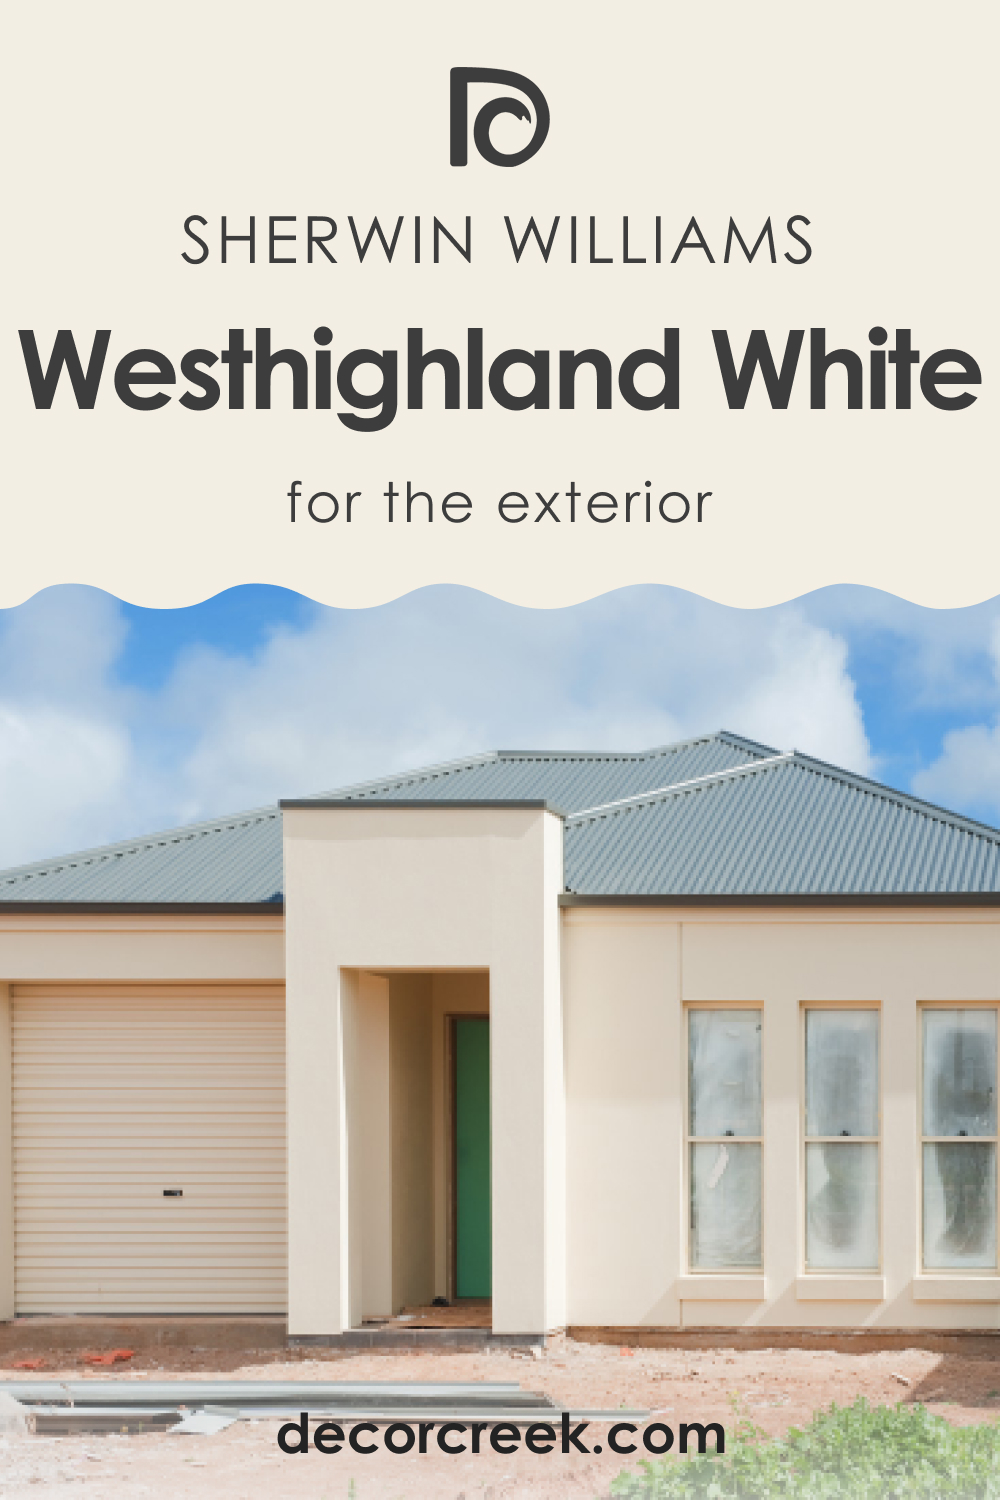 How to Use SW 7566 Westhighland White for an Exterior?